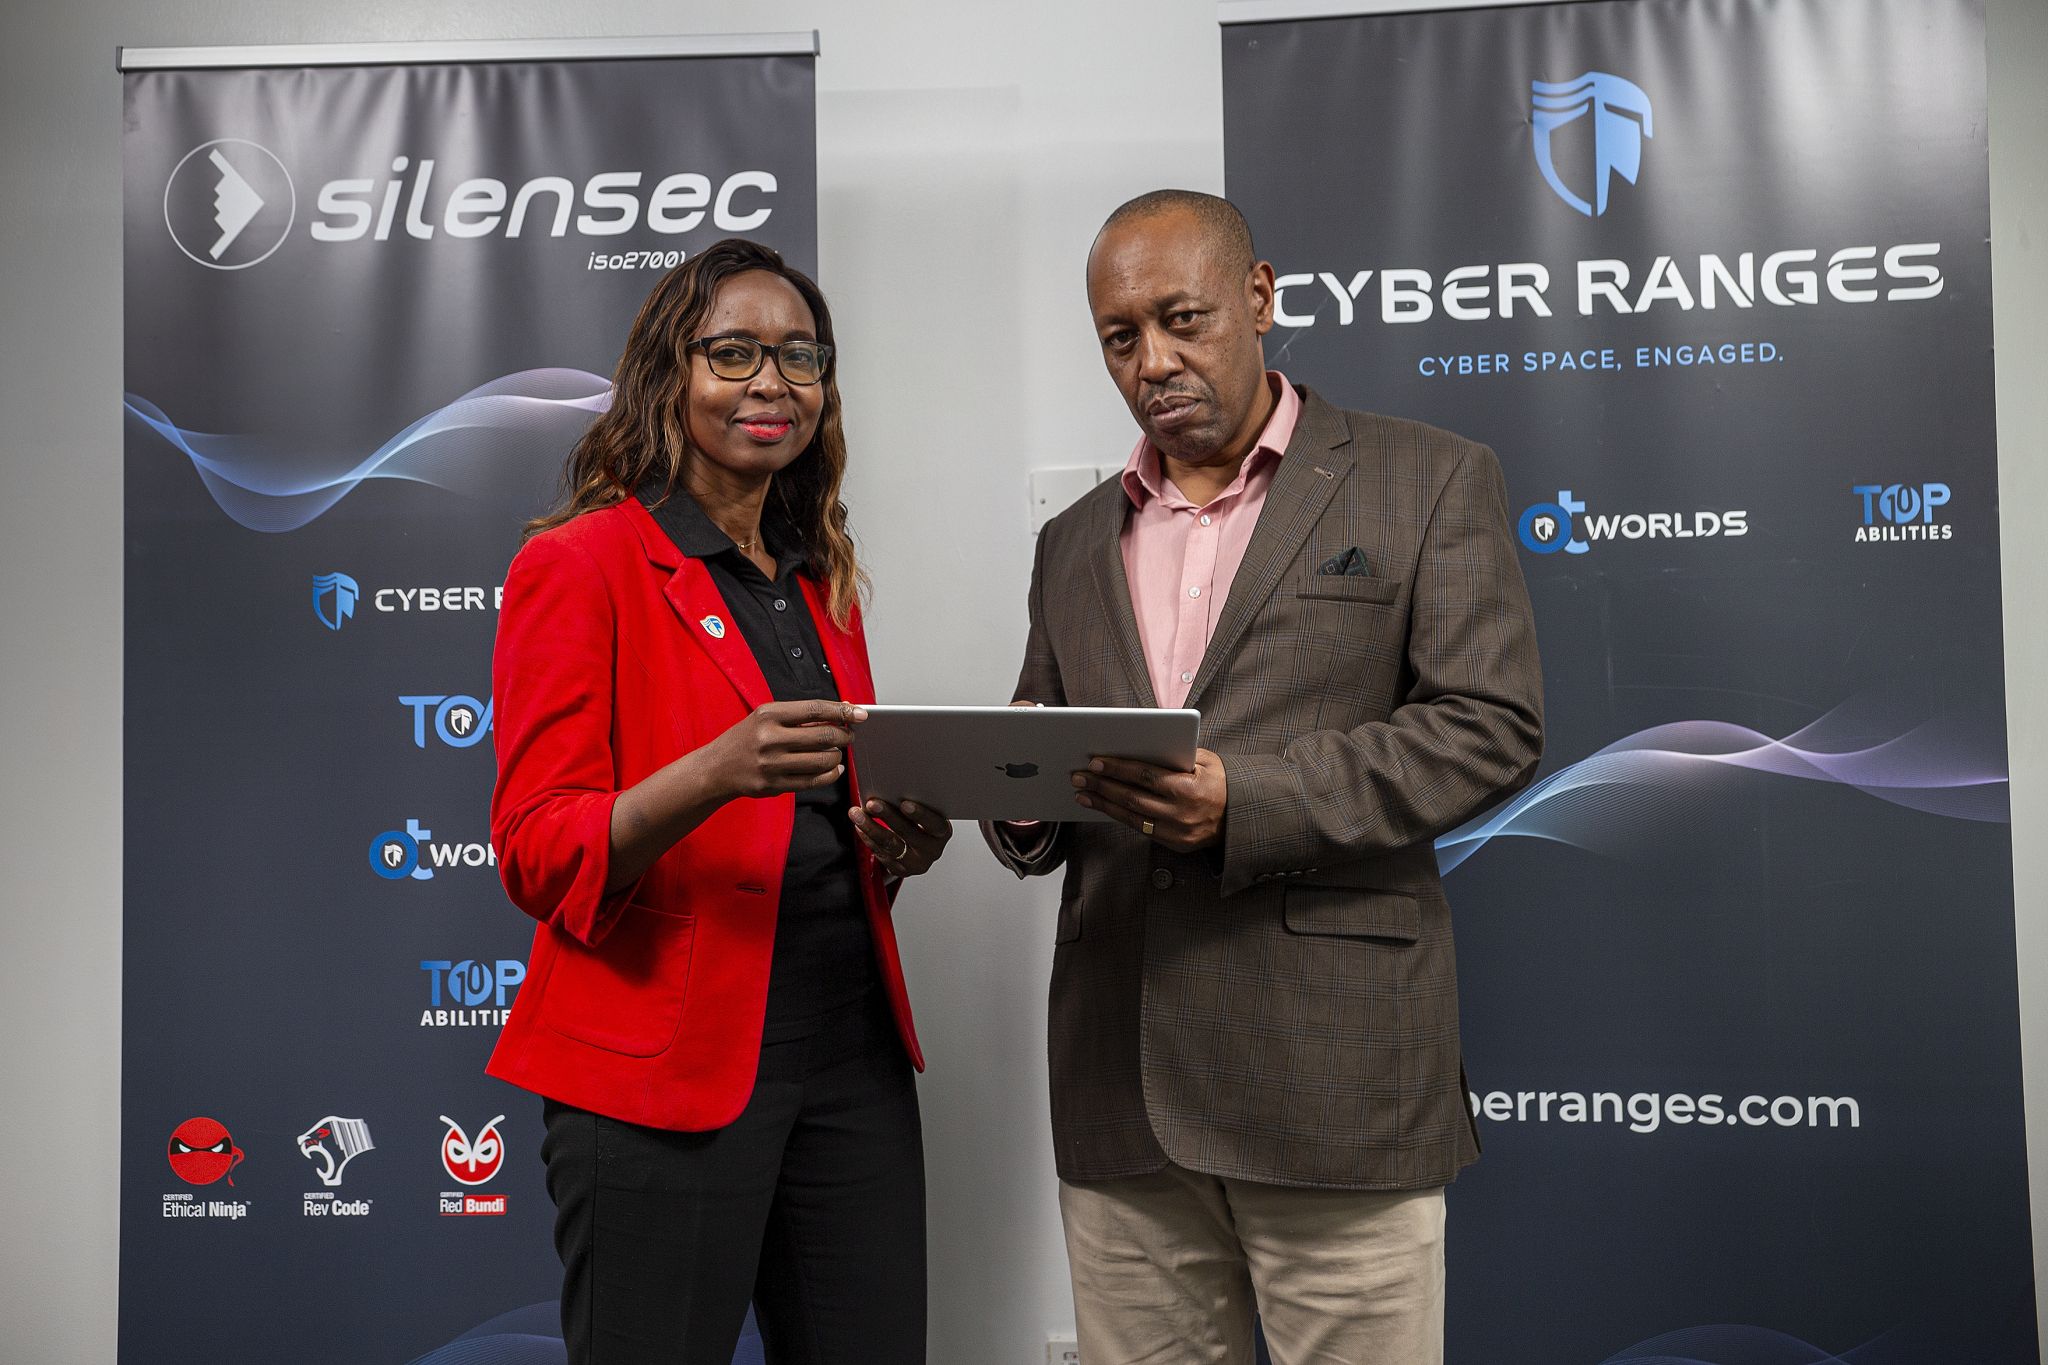 dx5ve Co-founder and Director, Andrew Karanja (right) with Pauline Omollo, the Head of Sales at CYBER RANGES. [Photo: Samuel Mwangi - CIO Africa]